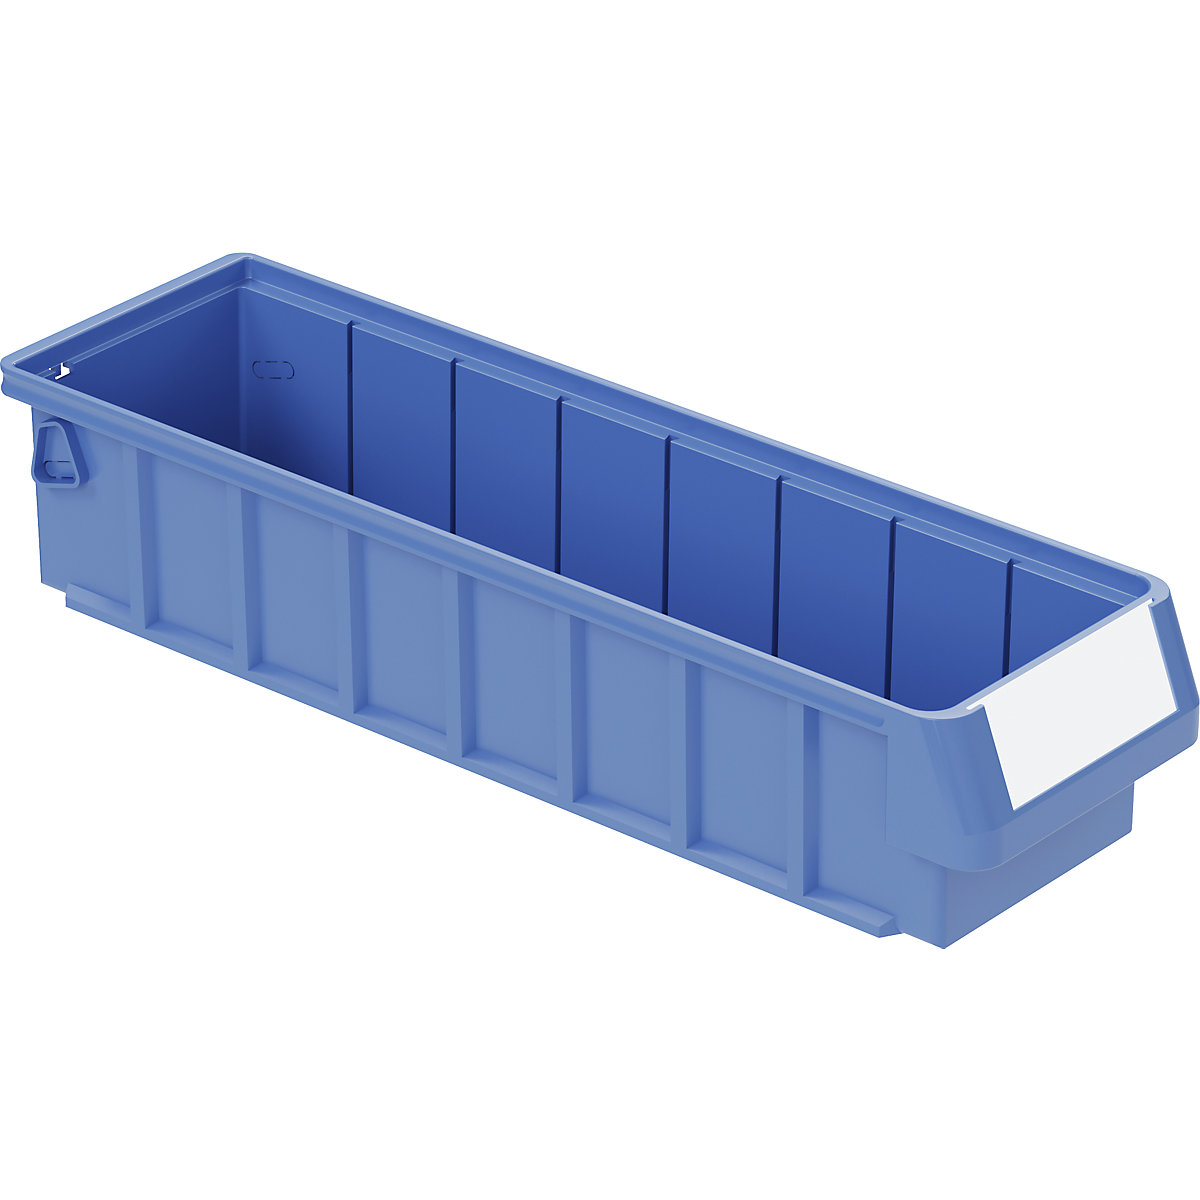 Shelf bin – BITO, made of PP, LxWxH 400 x 117 x 80 mm, pack of 16-7